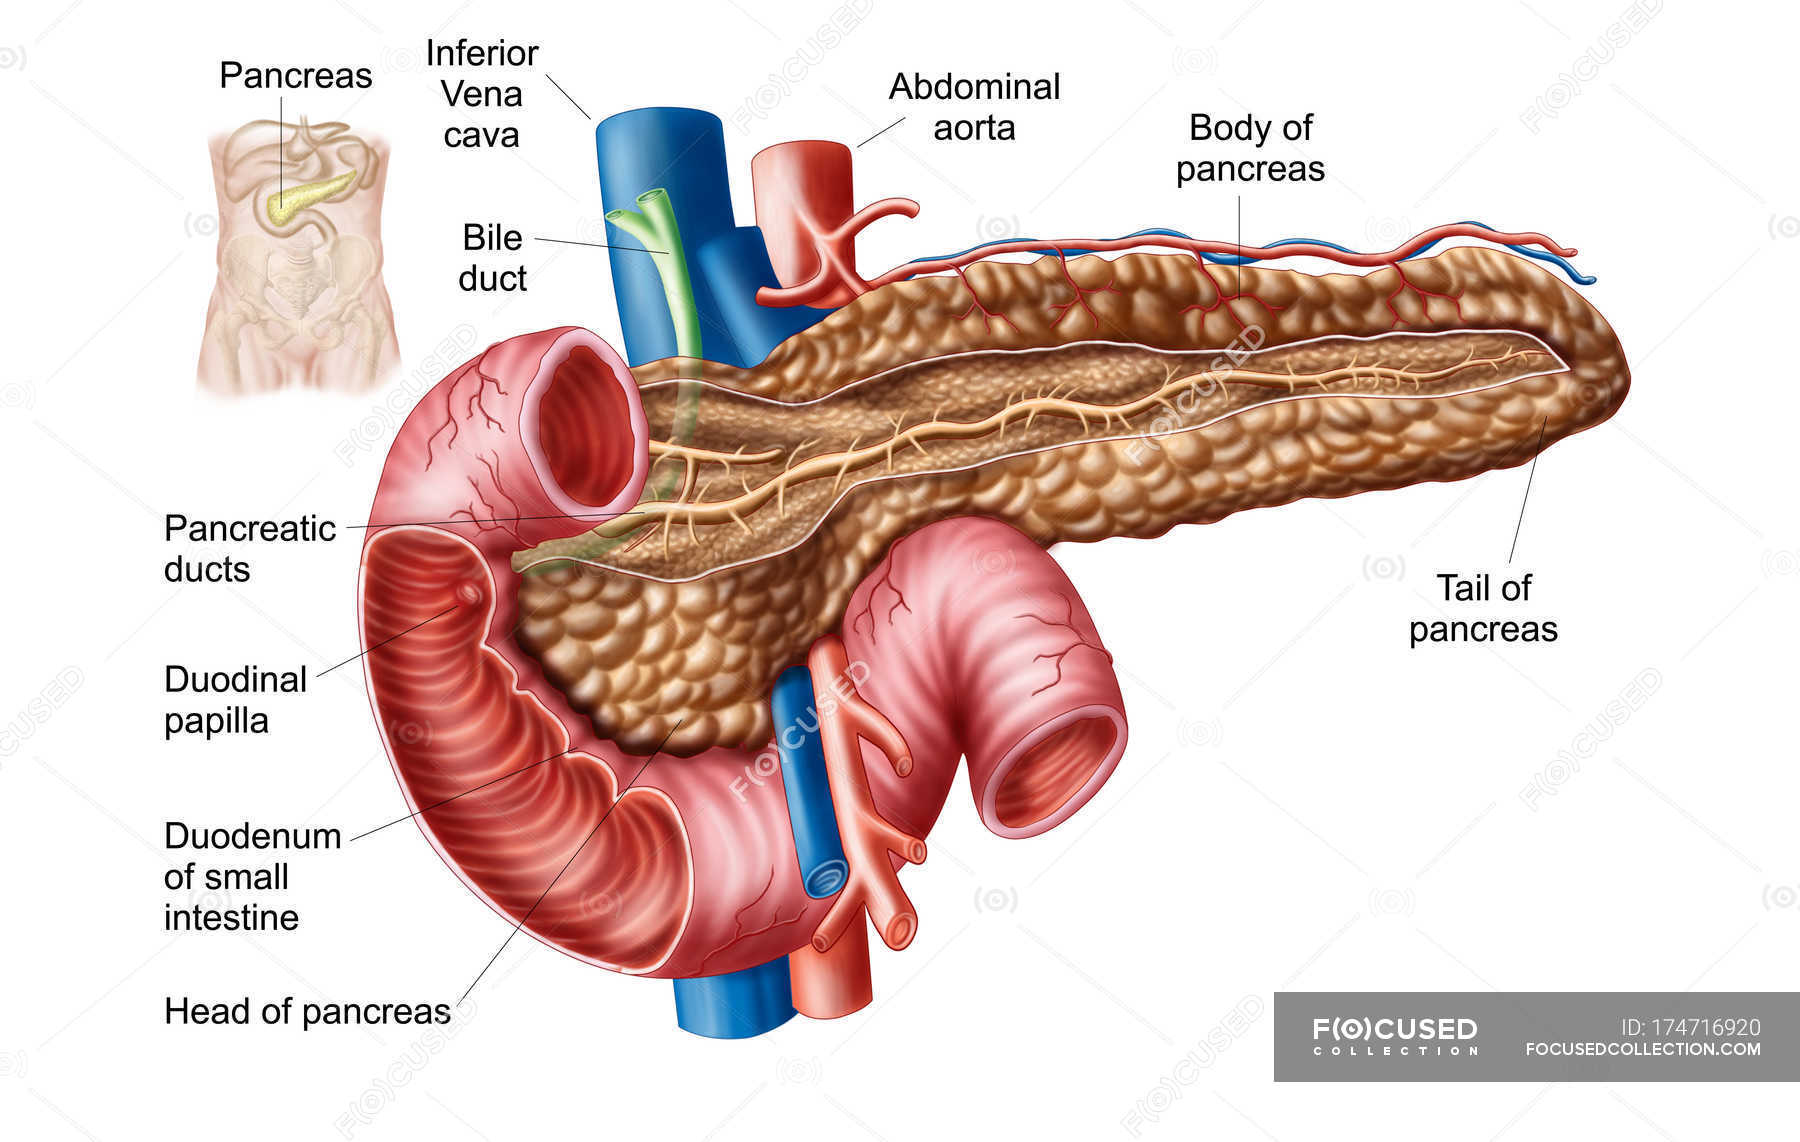 Medical Illustration Of Pancreas Anatomy With Labels Details